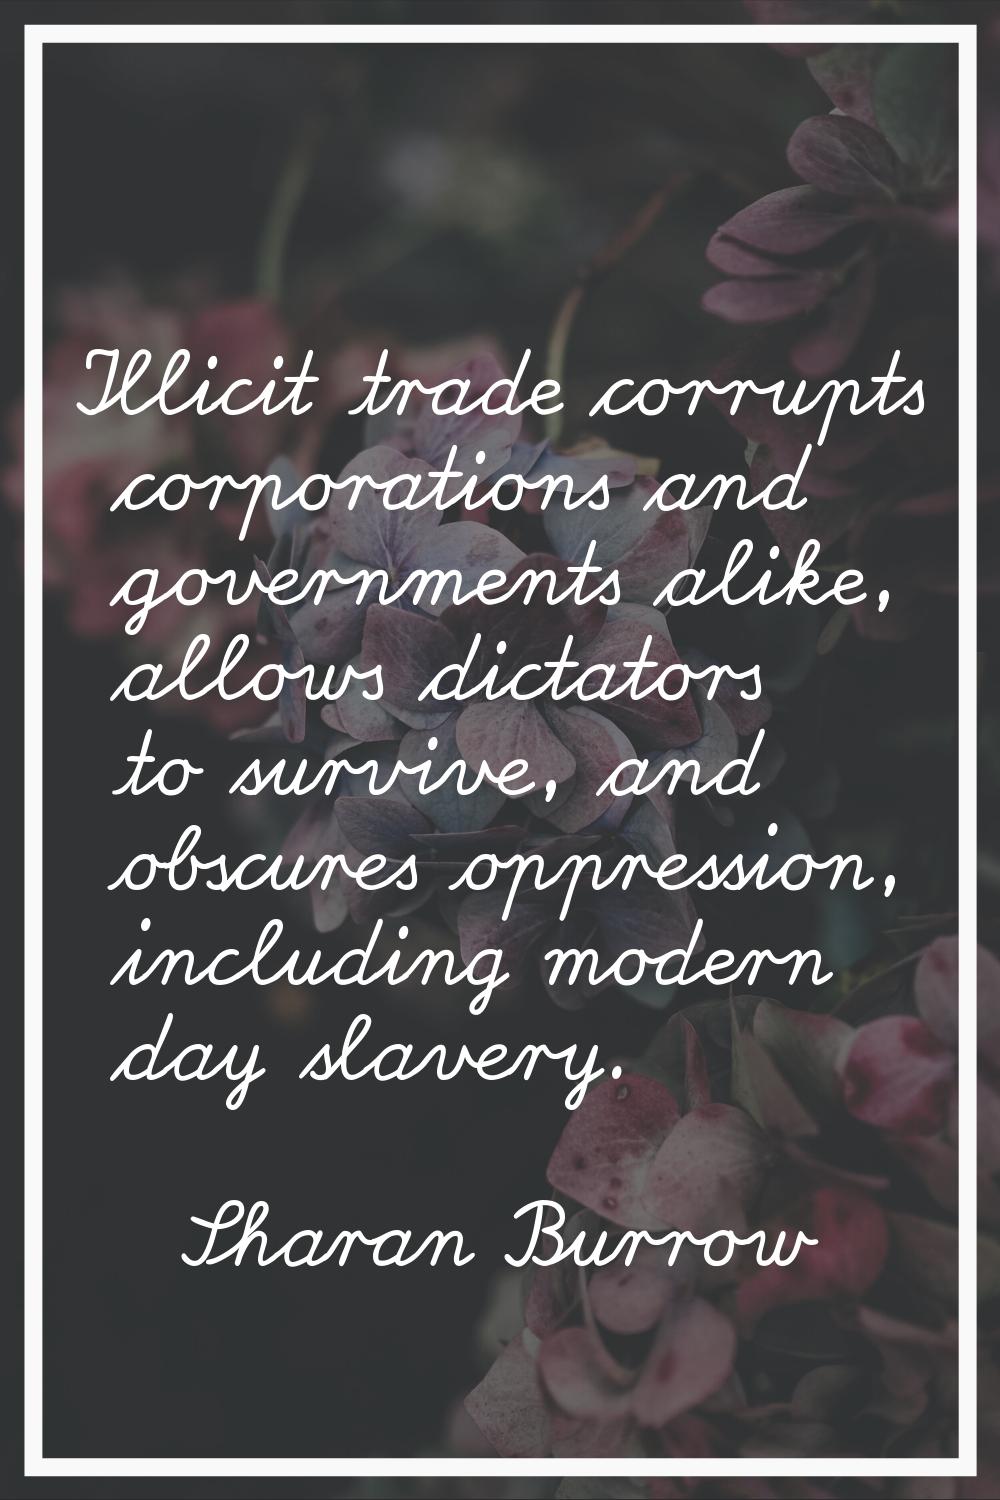 Illicit trade corrupts corporations and governments alike, allows dictators to survive, and obscure